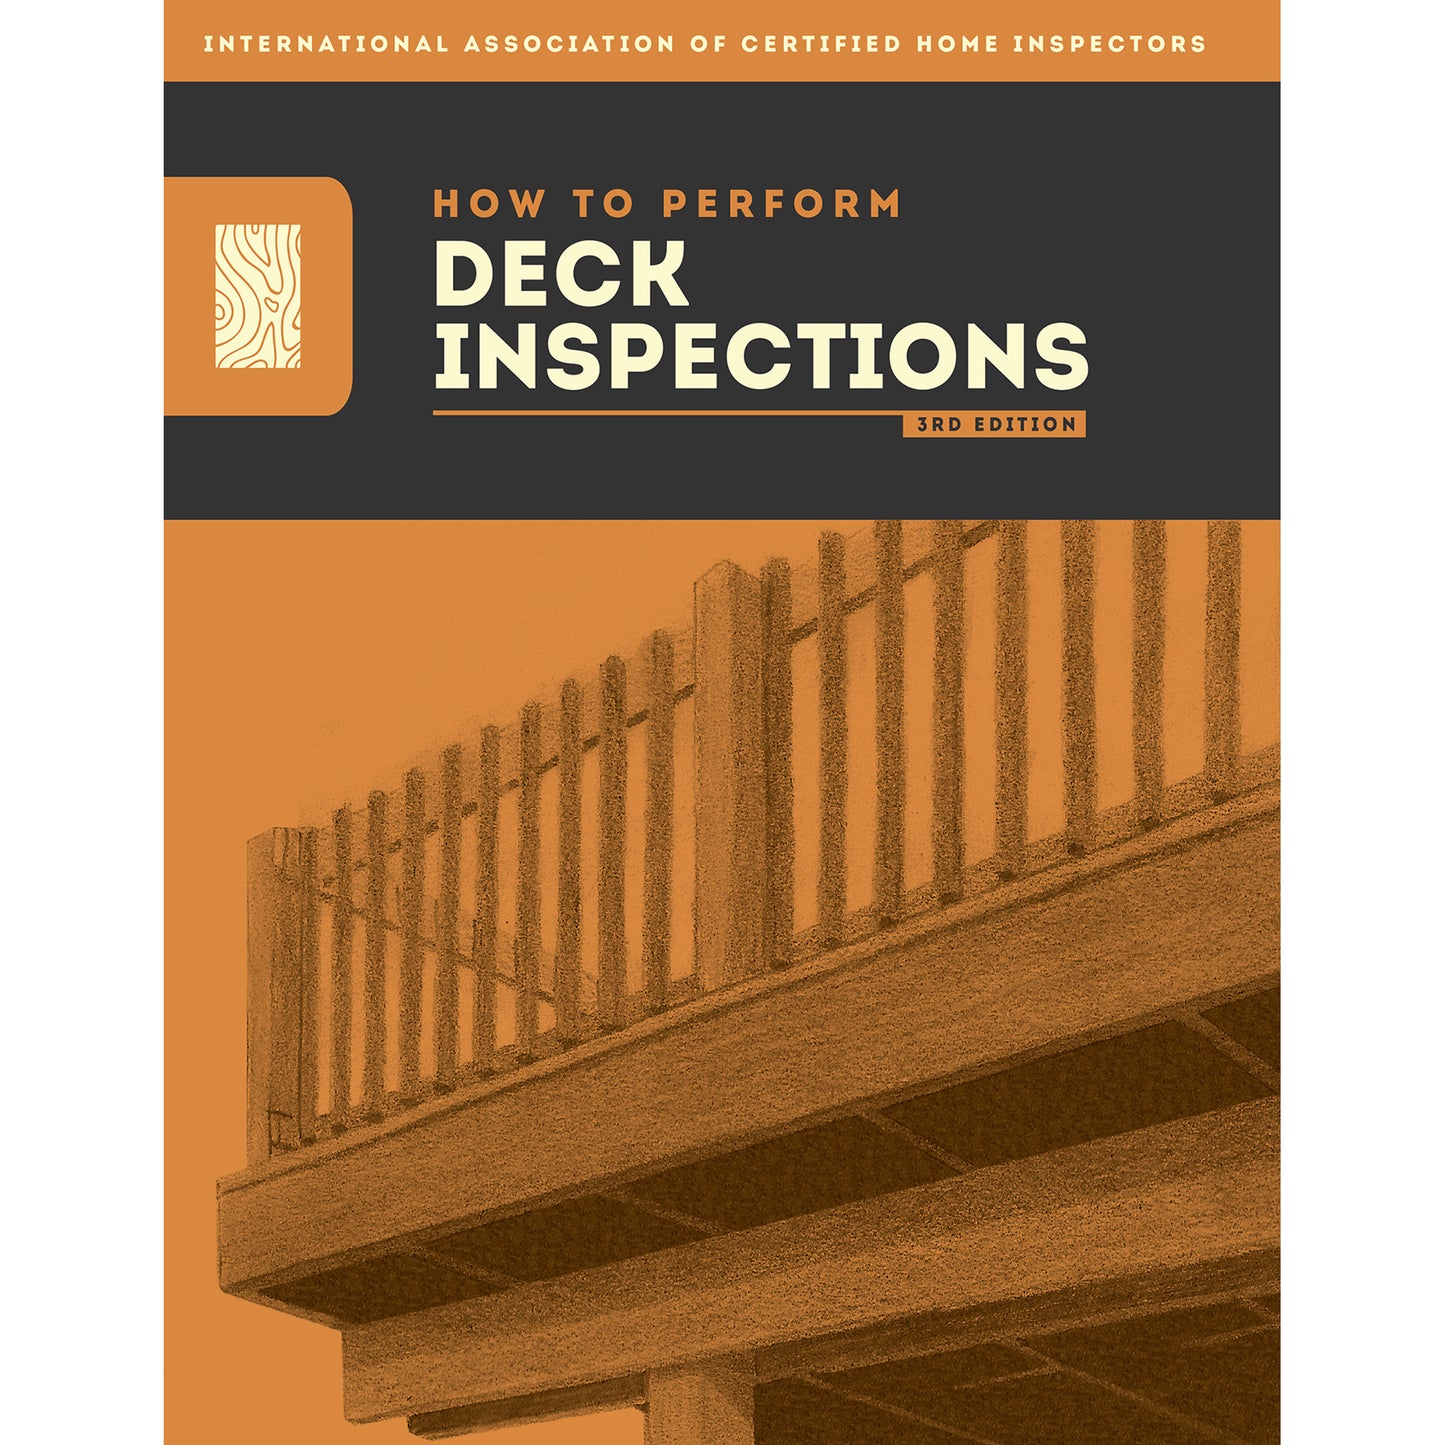 How to Perform Deck Inspections PDF Download